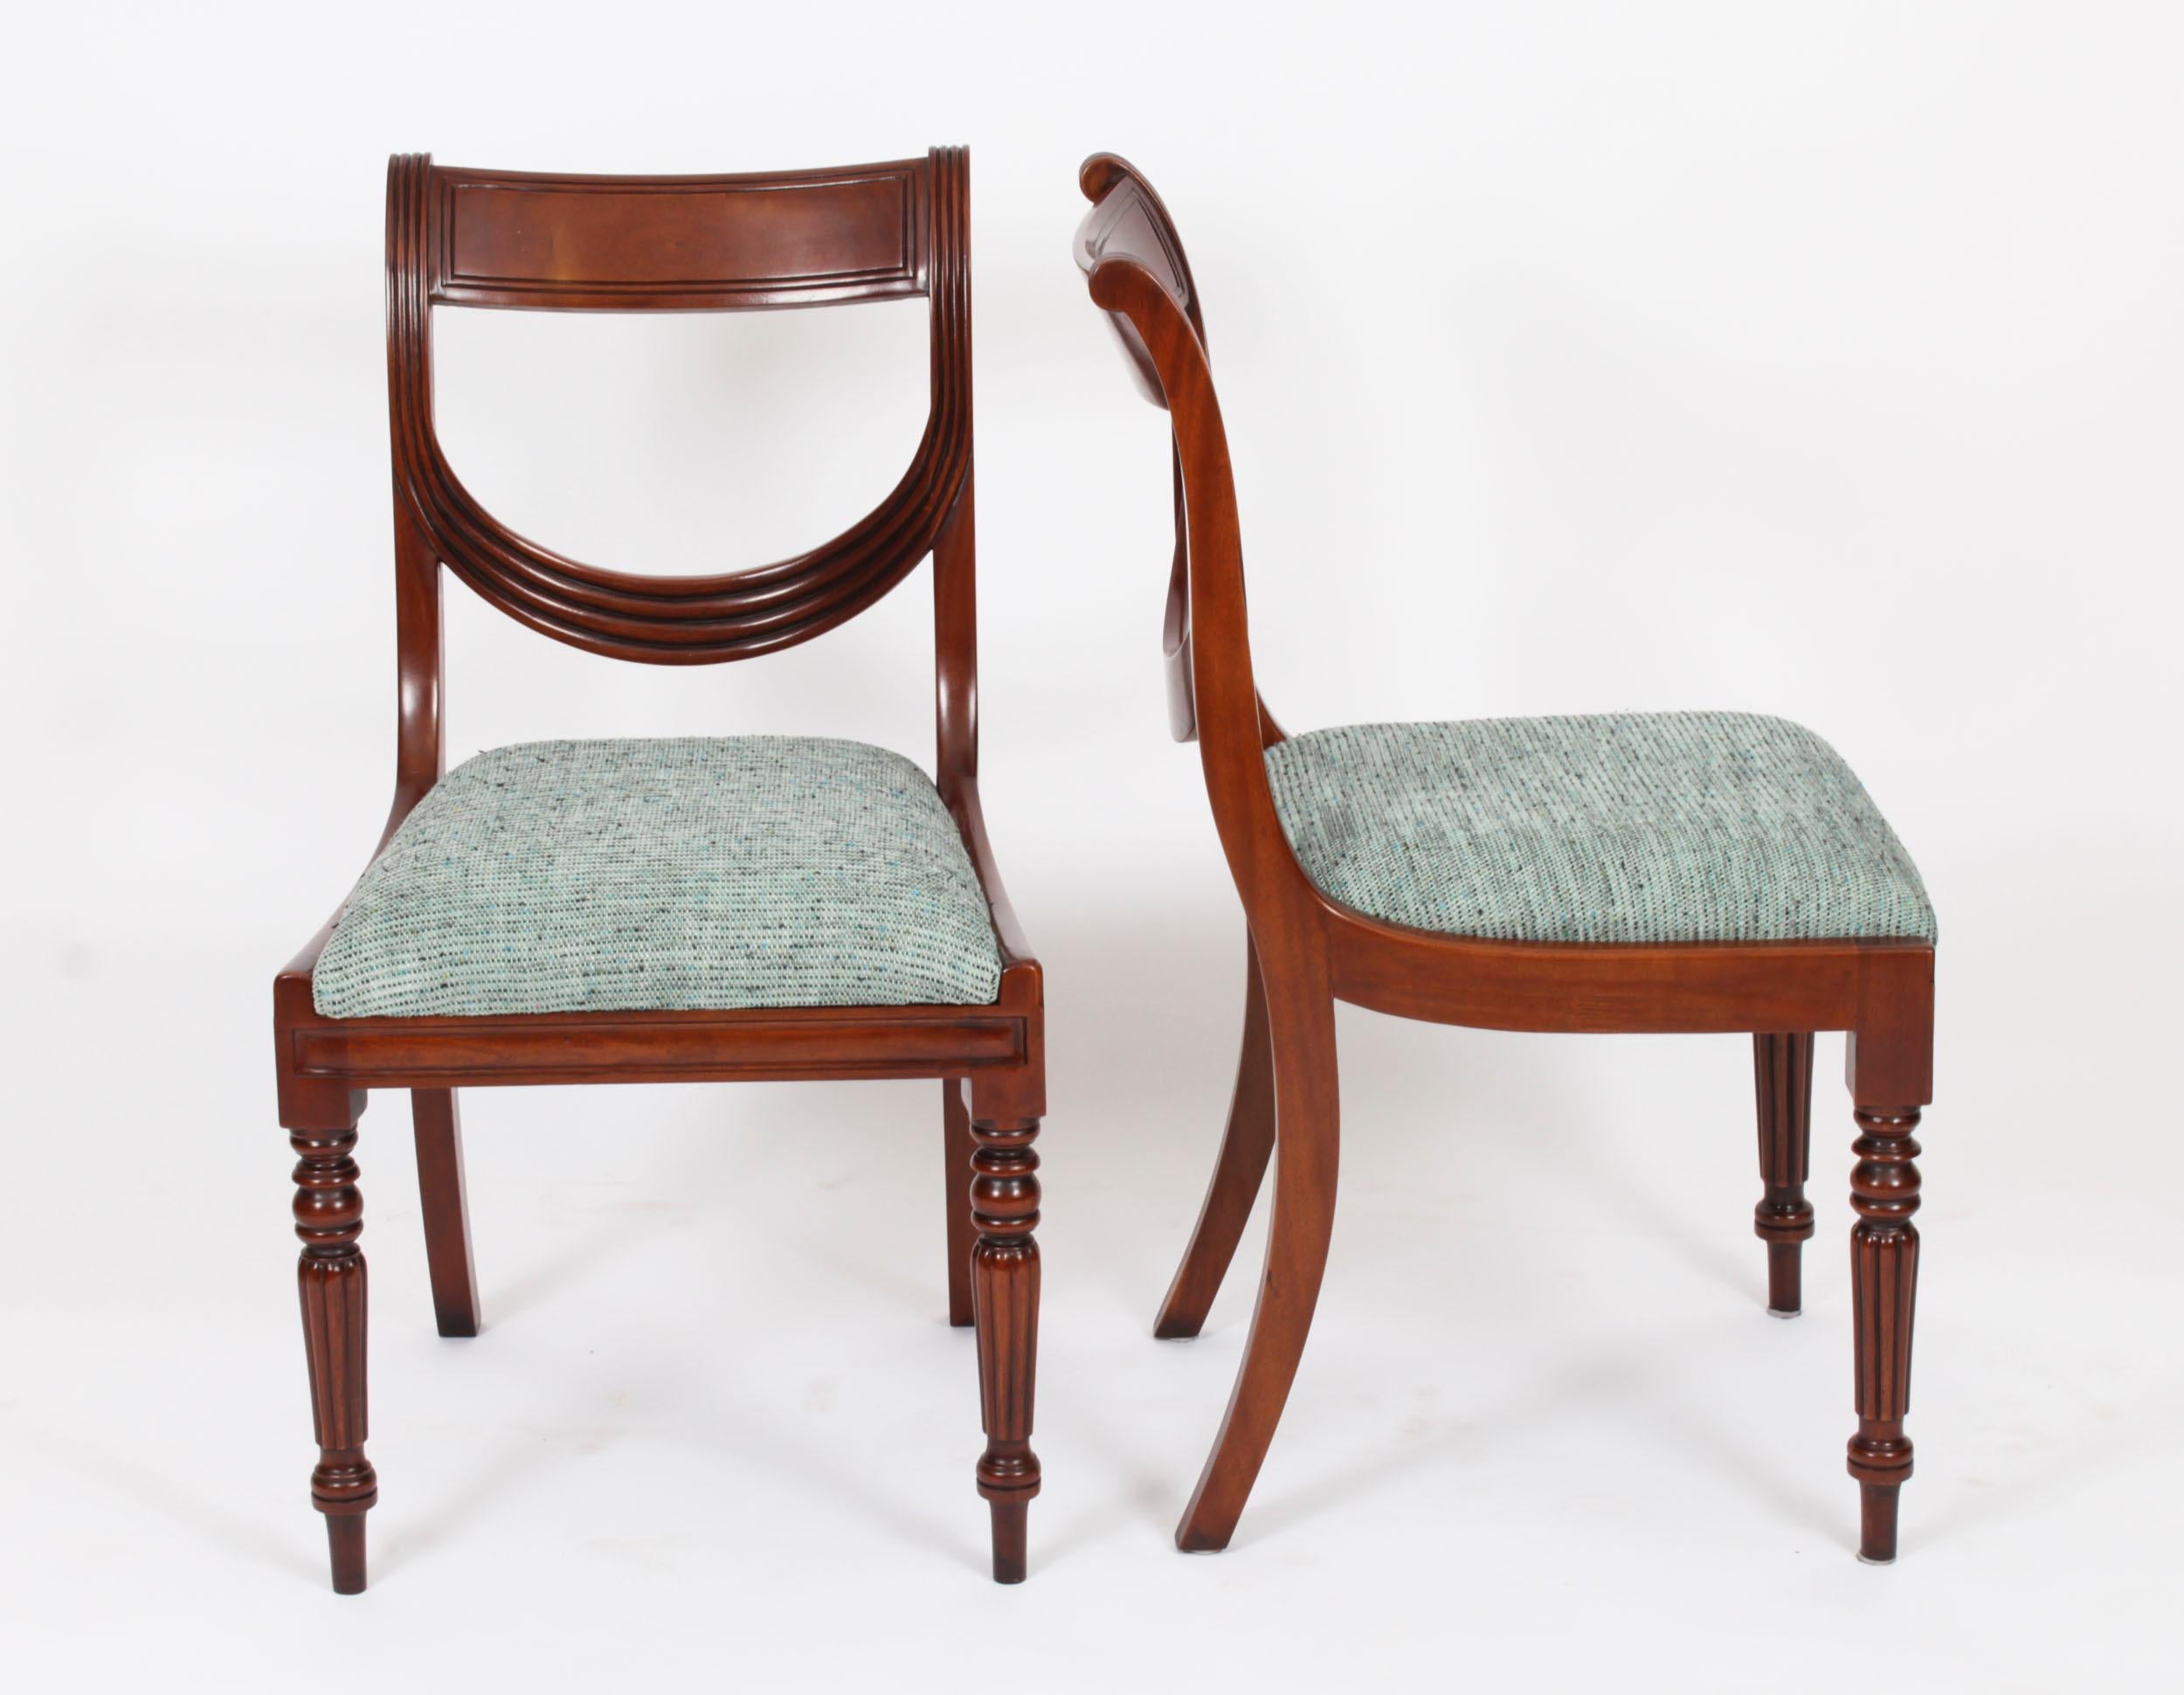 A delightful Vintage set of ten  superb swag back dining chairs, dating from the second half  of the 20th Century.

Masterfully crafted in beautiful solid mahogany throughout, the finish and attention to detail on display are truly